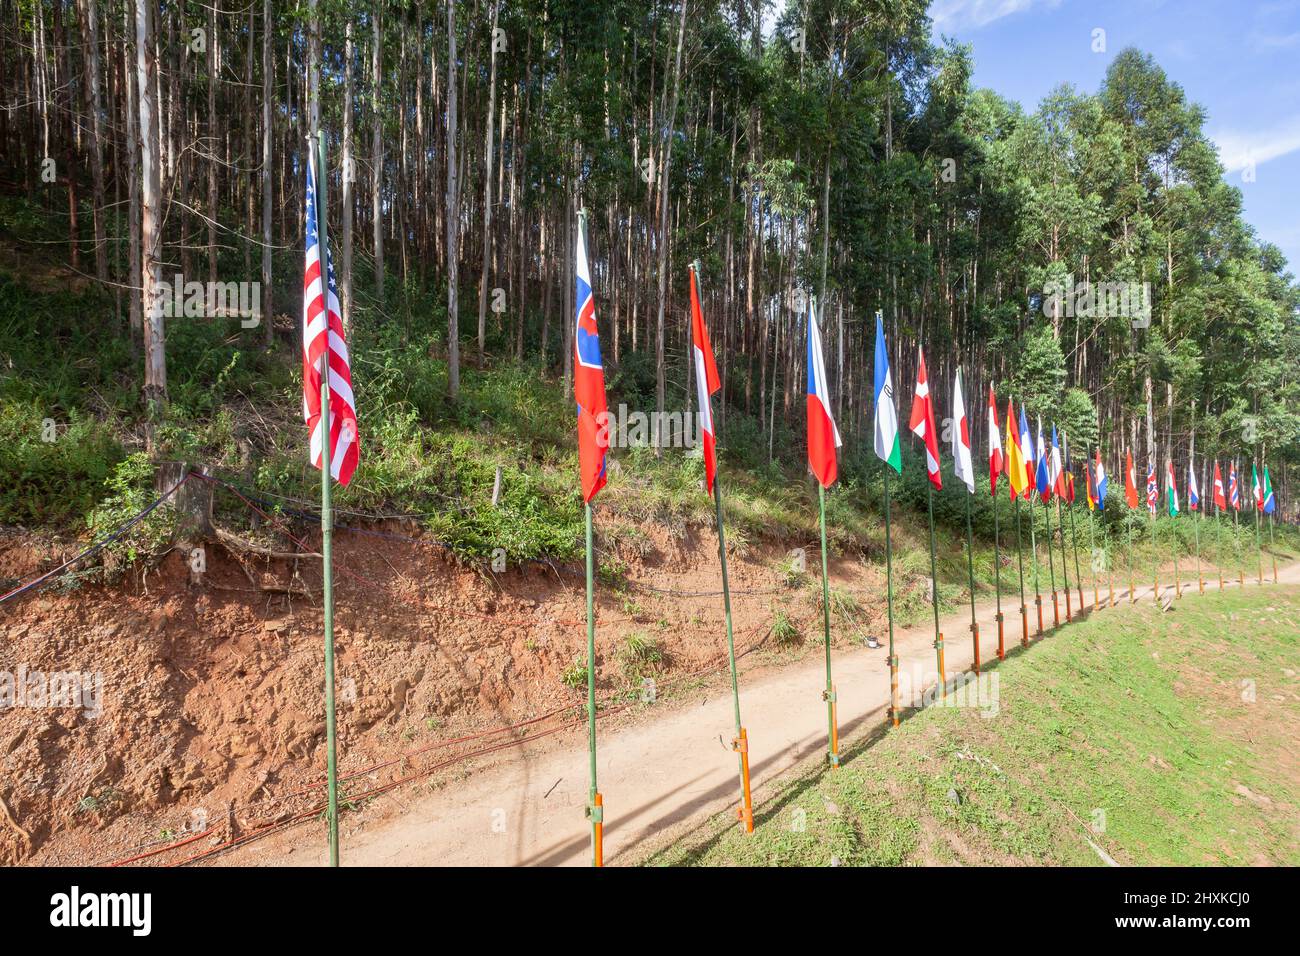 International cycling mountain mtb bike event with athlete cyclists flags of dozen countries on dirt track path at rural outdoor sporting location. Stock Photo